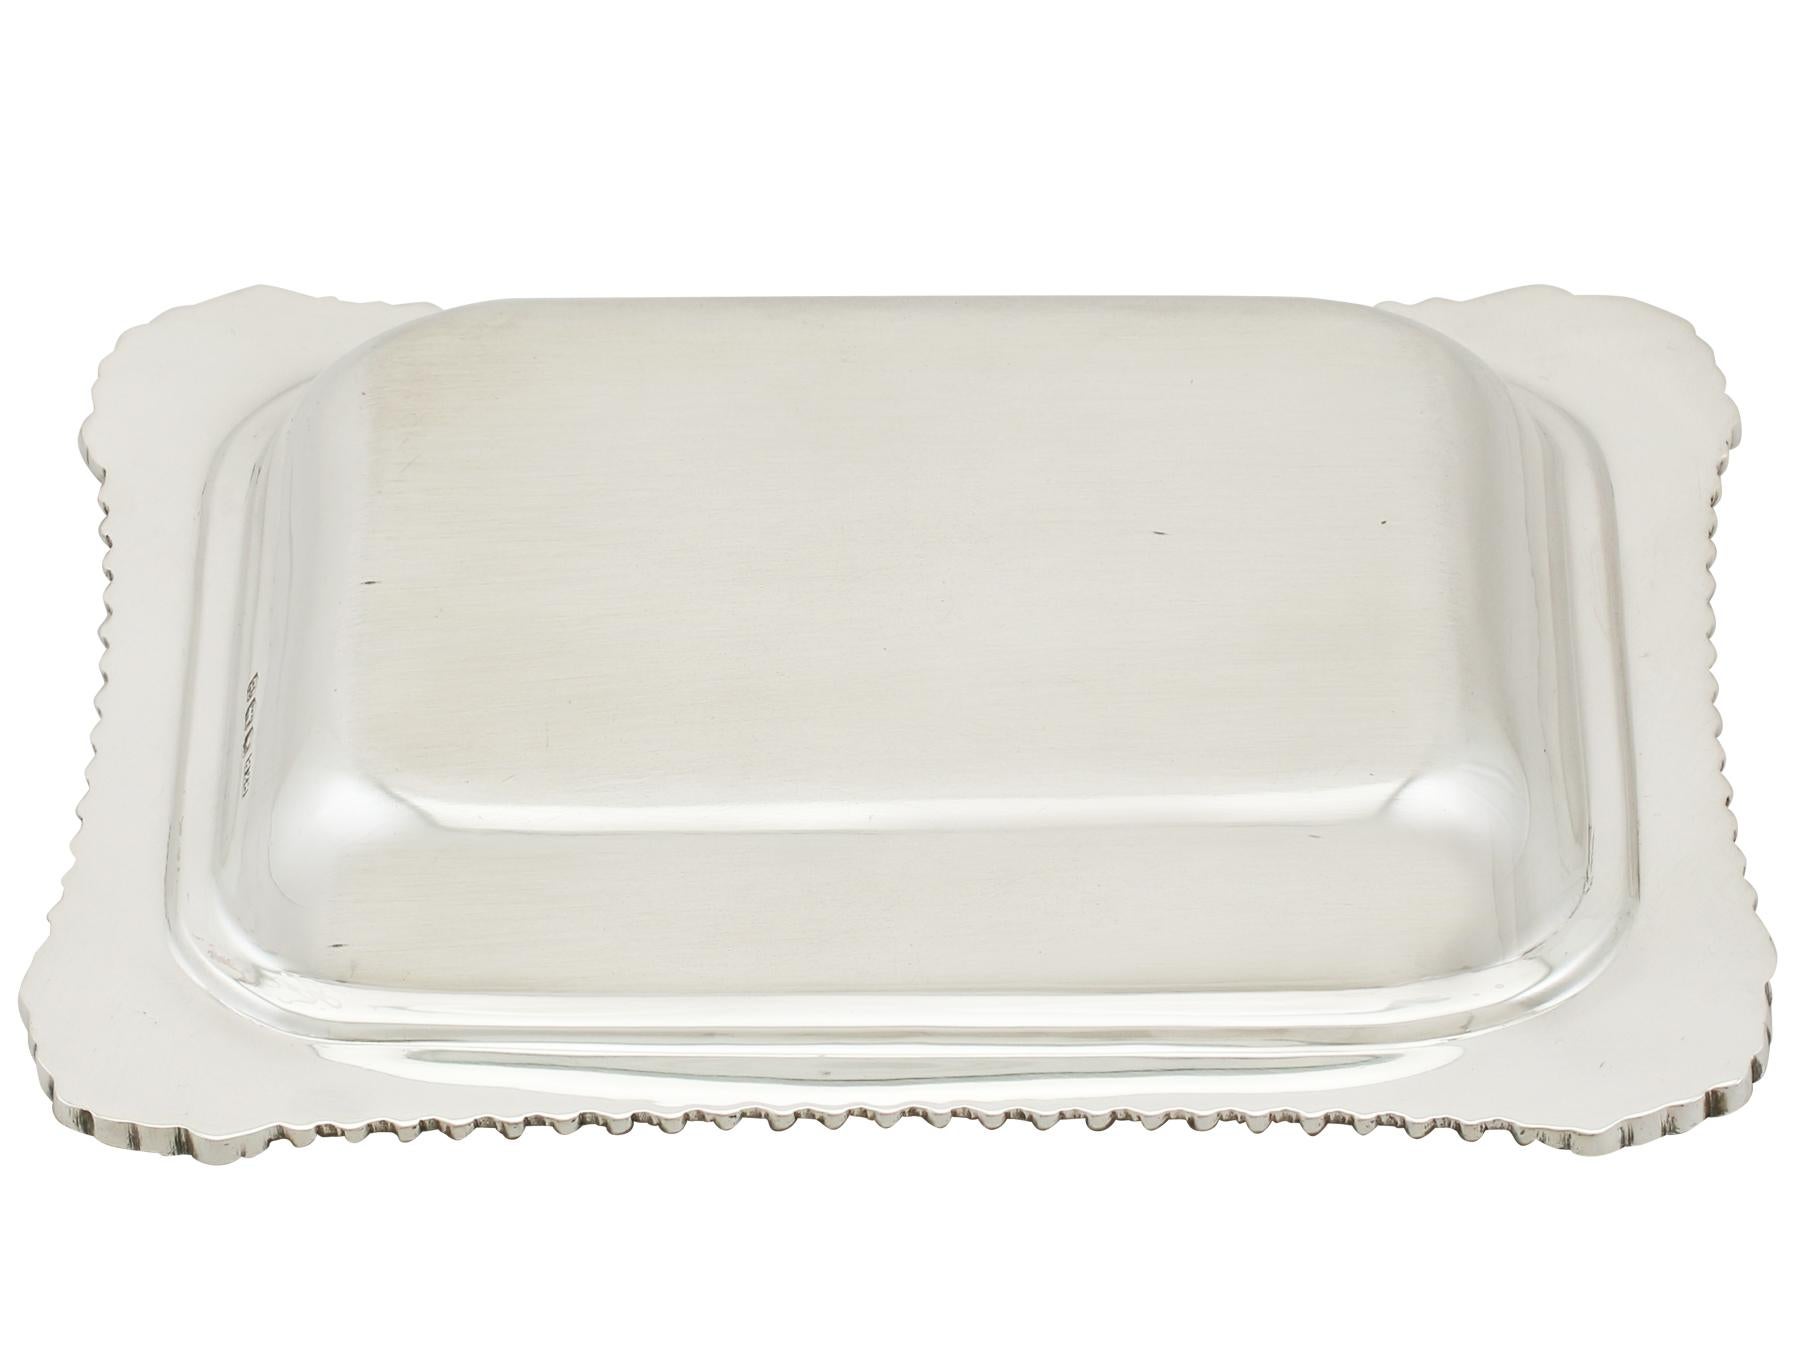 Mid-20th Century 1960s Sterling Silver Butter Dish and Cover by Roberts & Belk Ltd